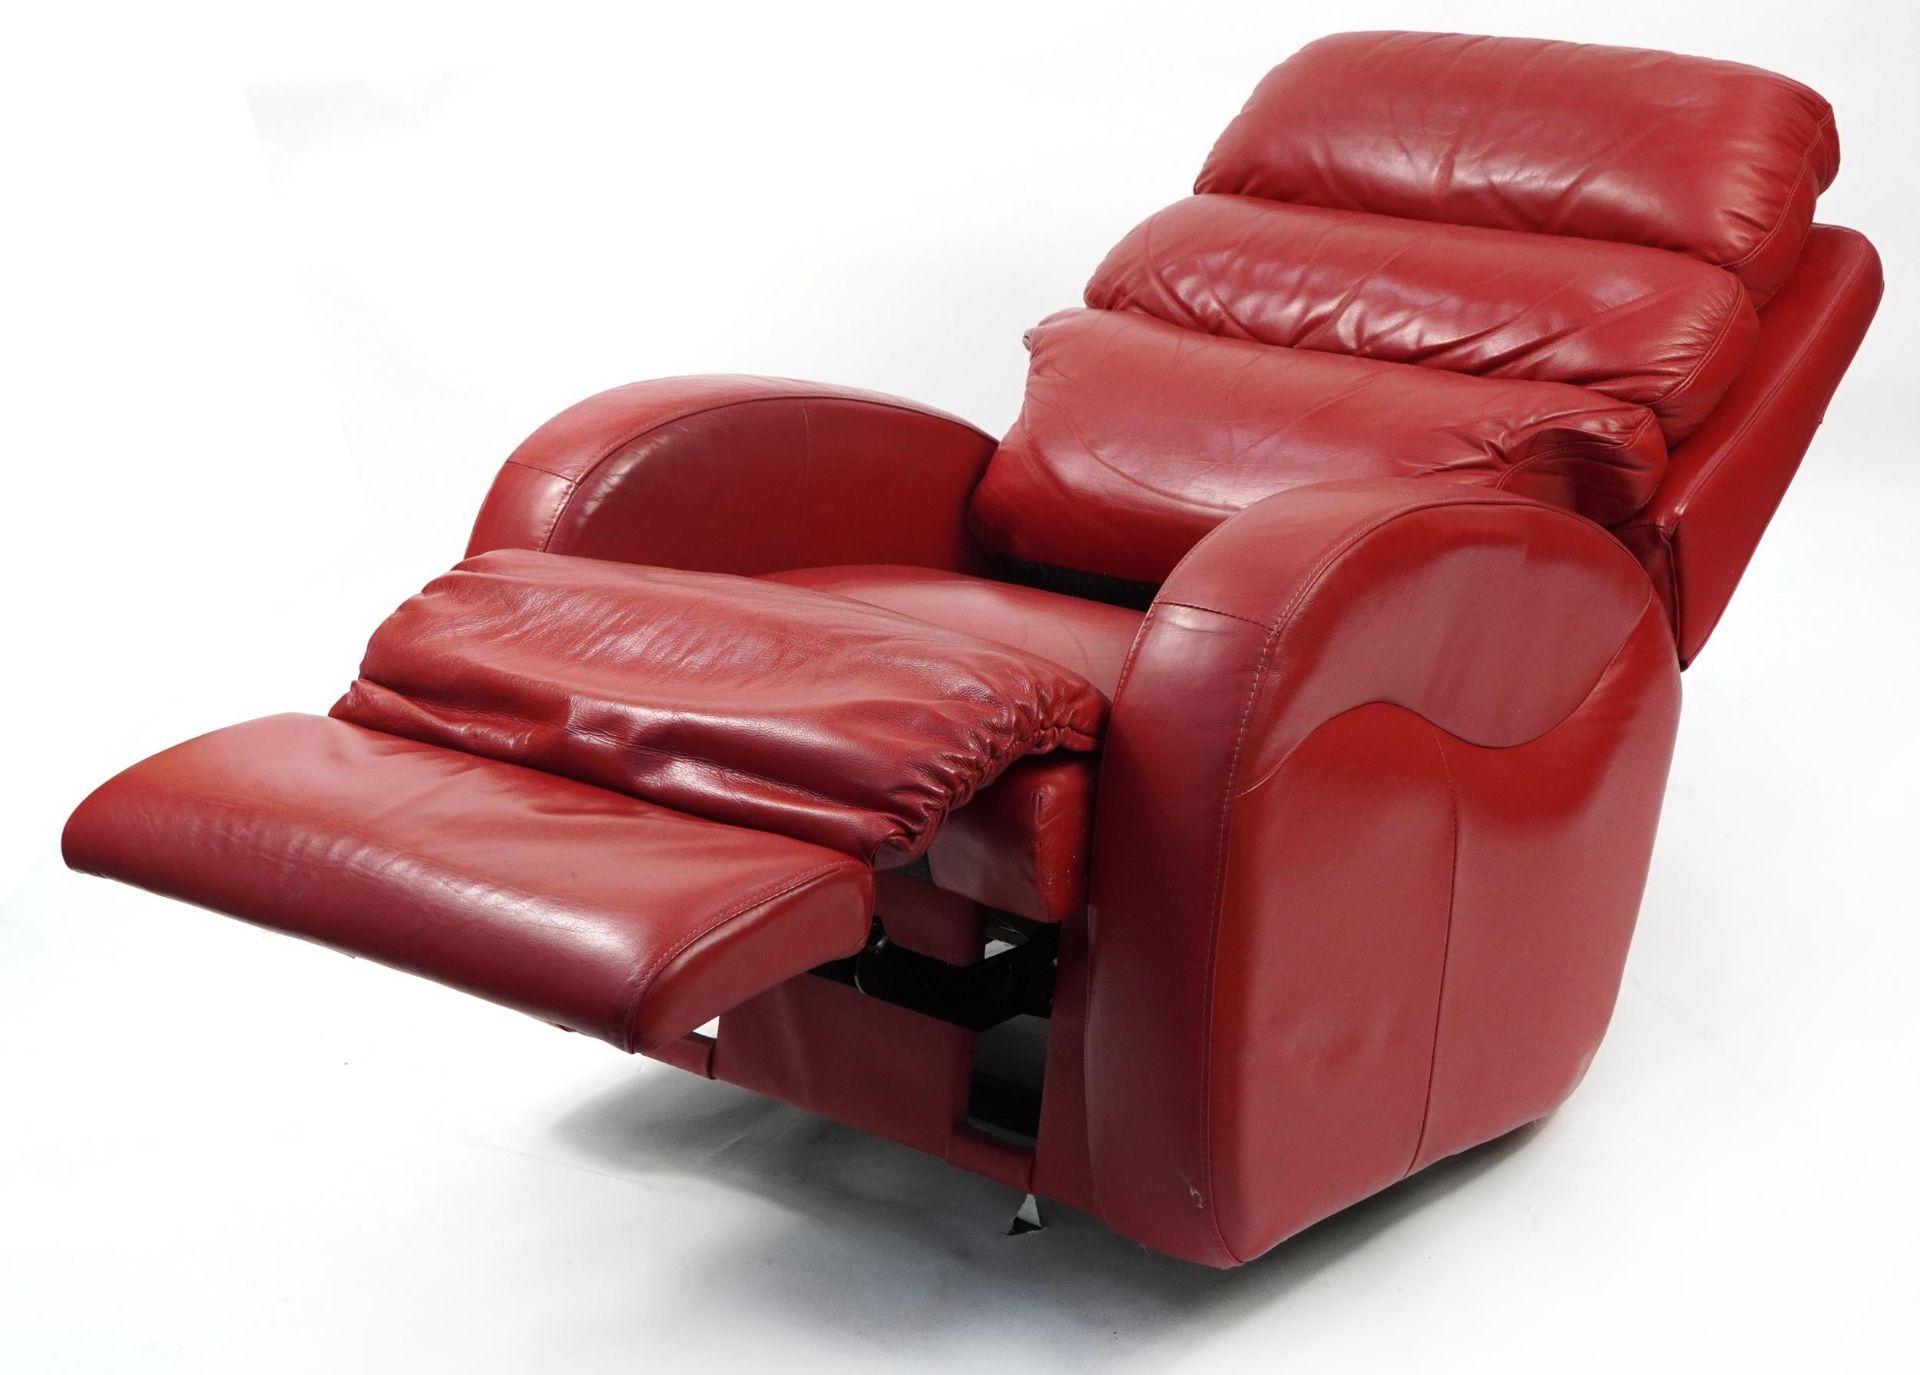 La-Z-Boy, contemporary red leather reclining armchair, 100cm high - Image 2 of 5